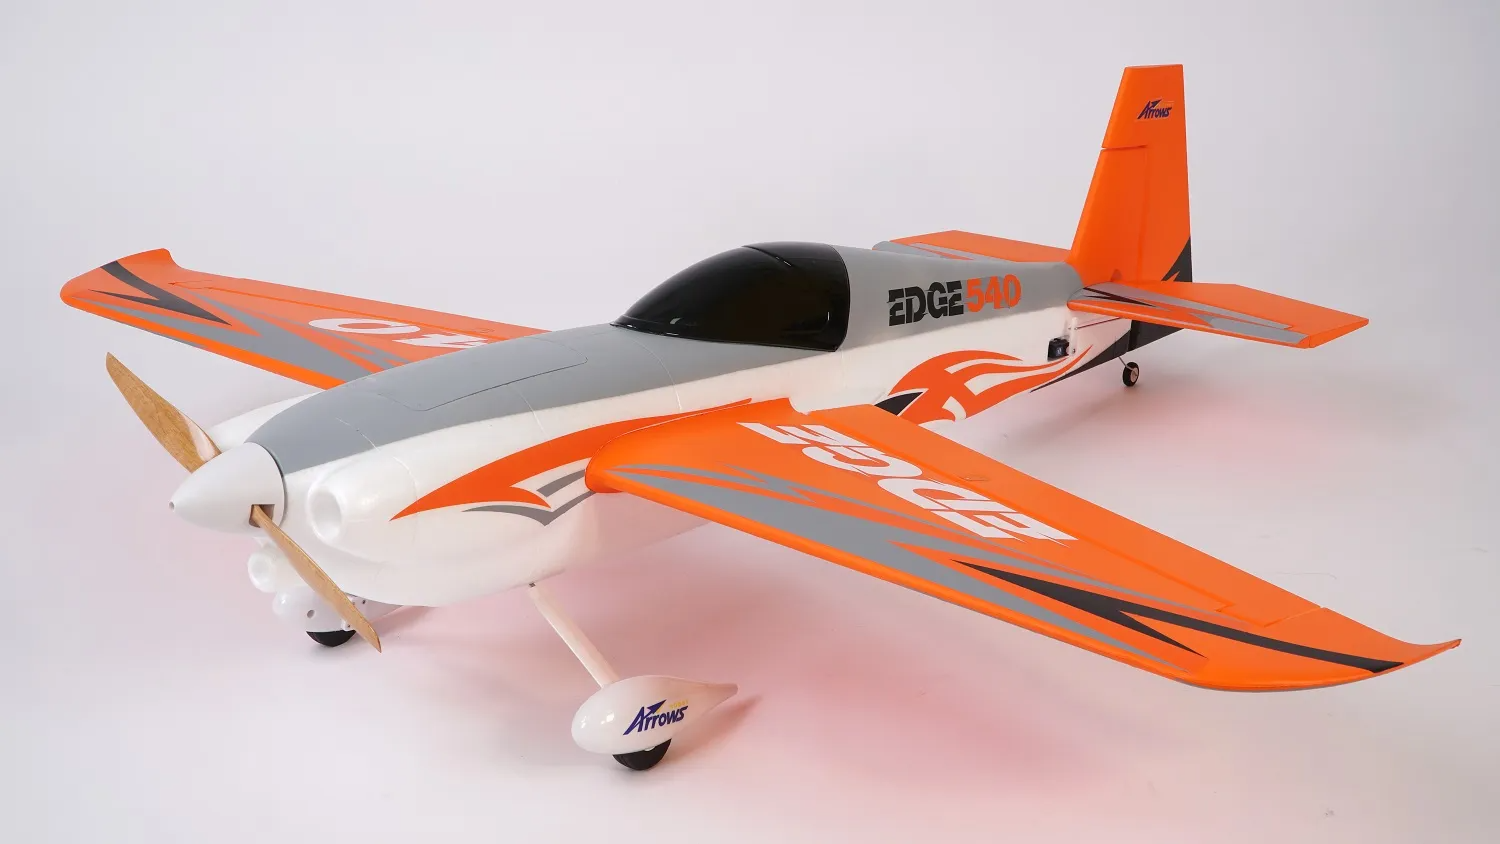 Arrows Edge 540 1300mm PNP with Vector Flight Stabilization System